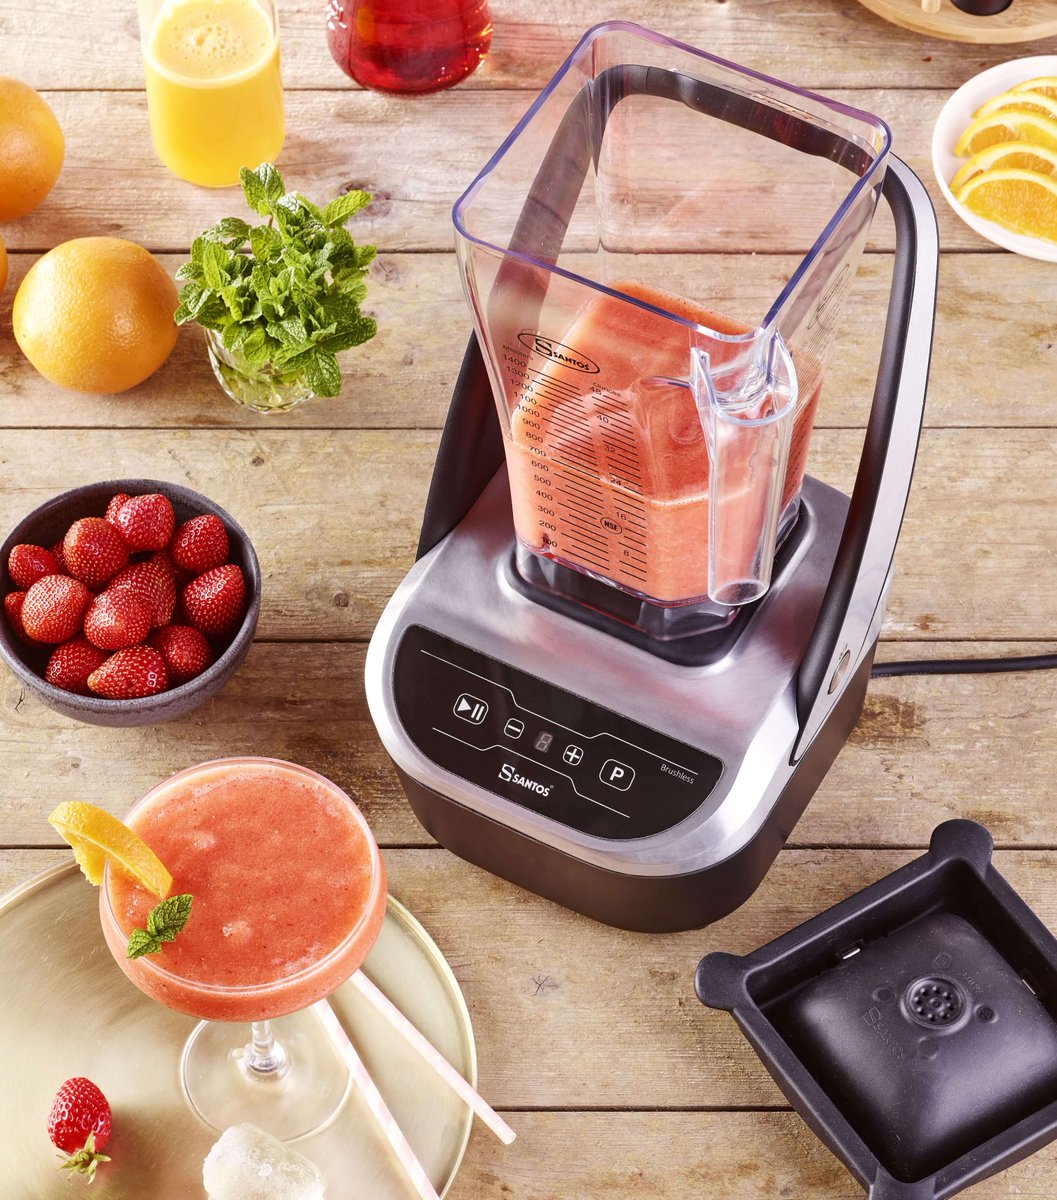 Thanks to its 9 optimized programs, @SantosAddict  #brushlessblender #66 is perfect to make cocktails, smoothies, milkshakes, iced coffees, and any other mixed drink.

Read the full article at this link:
horeca-online.com/compact-brushl…

#Horeca #editricezeus